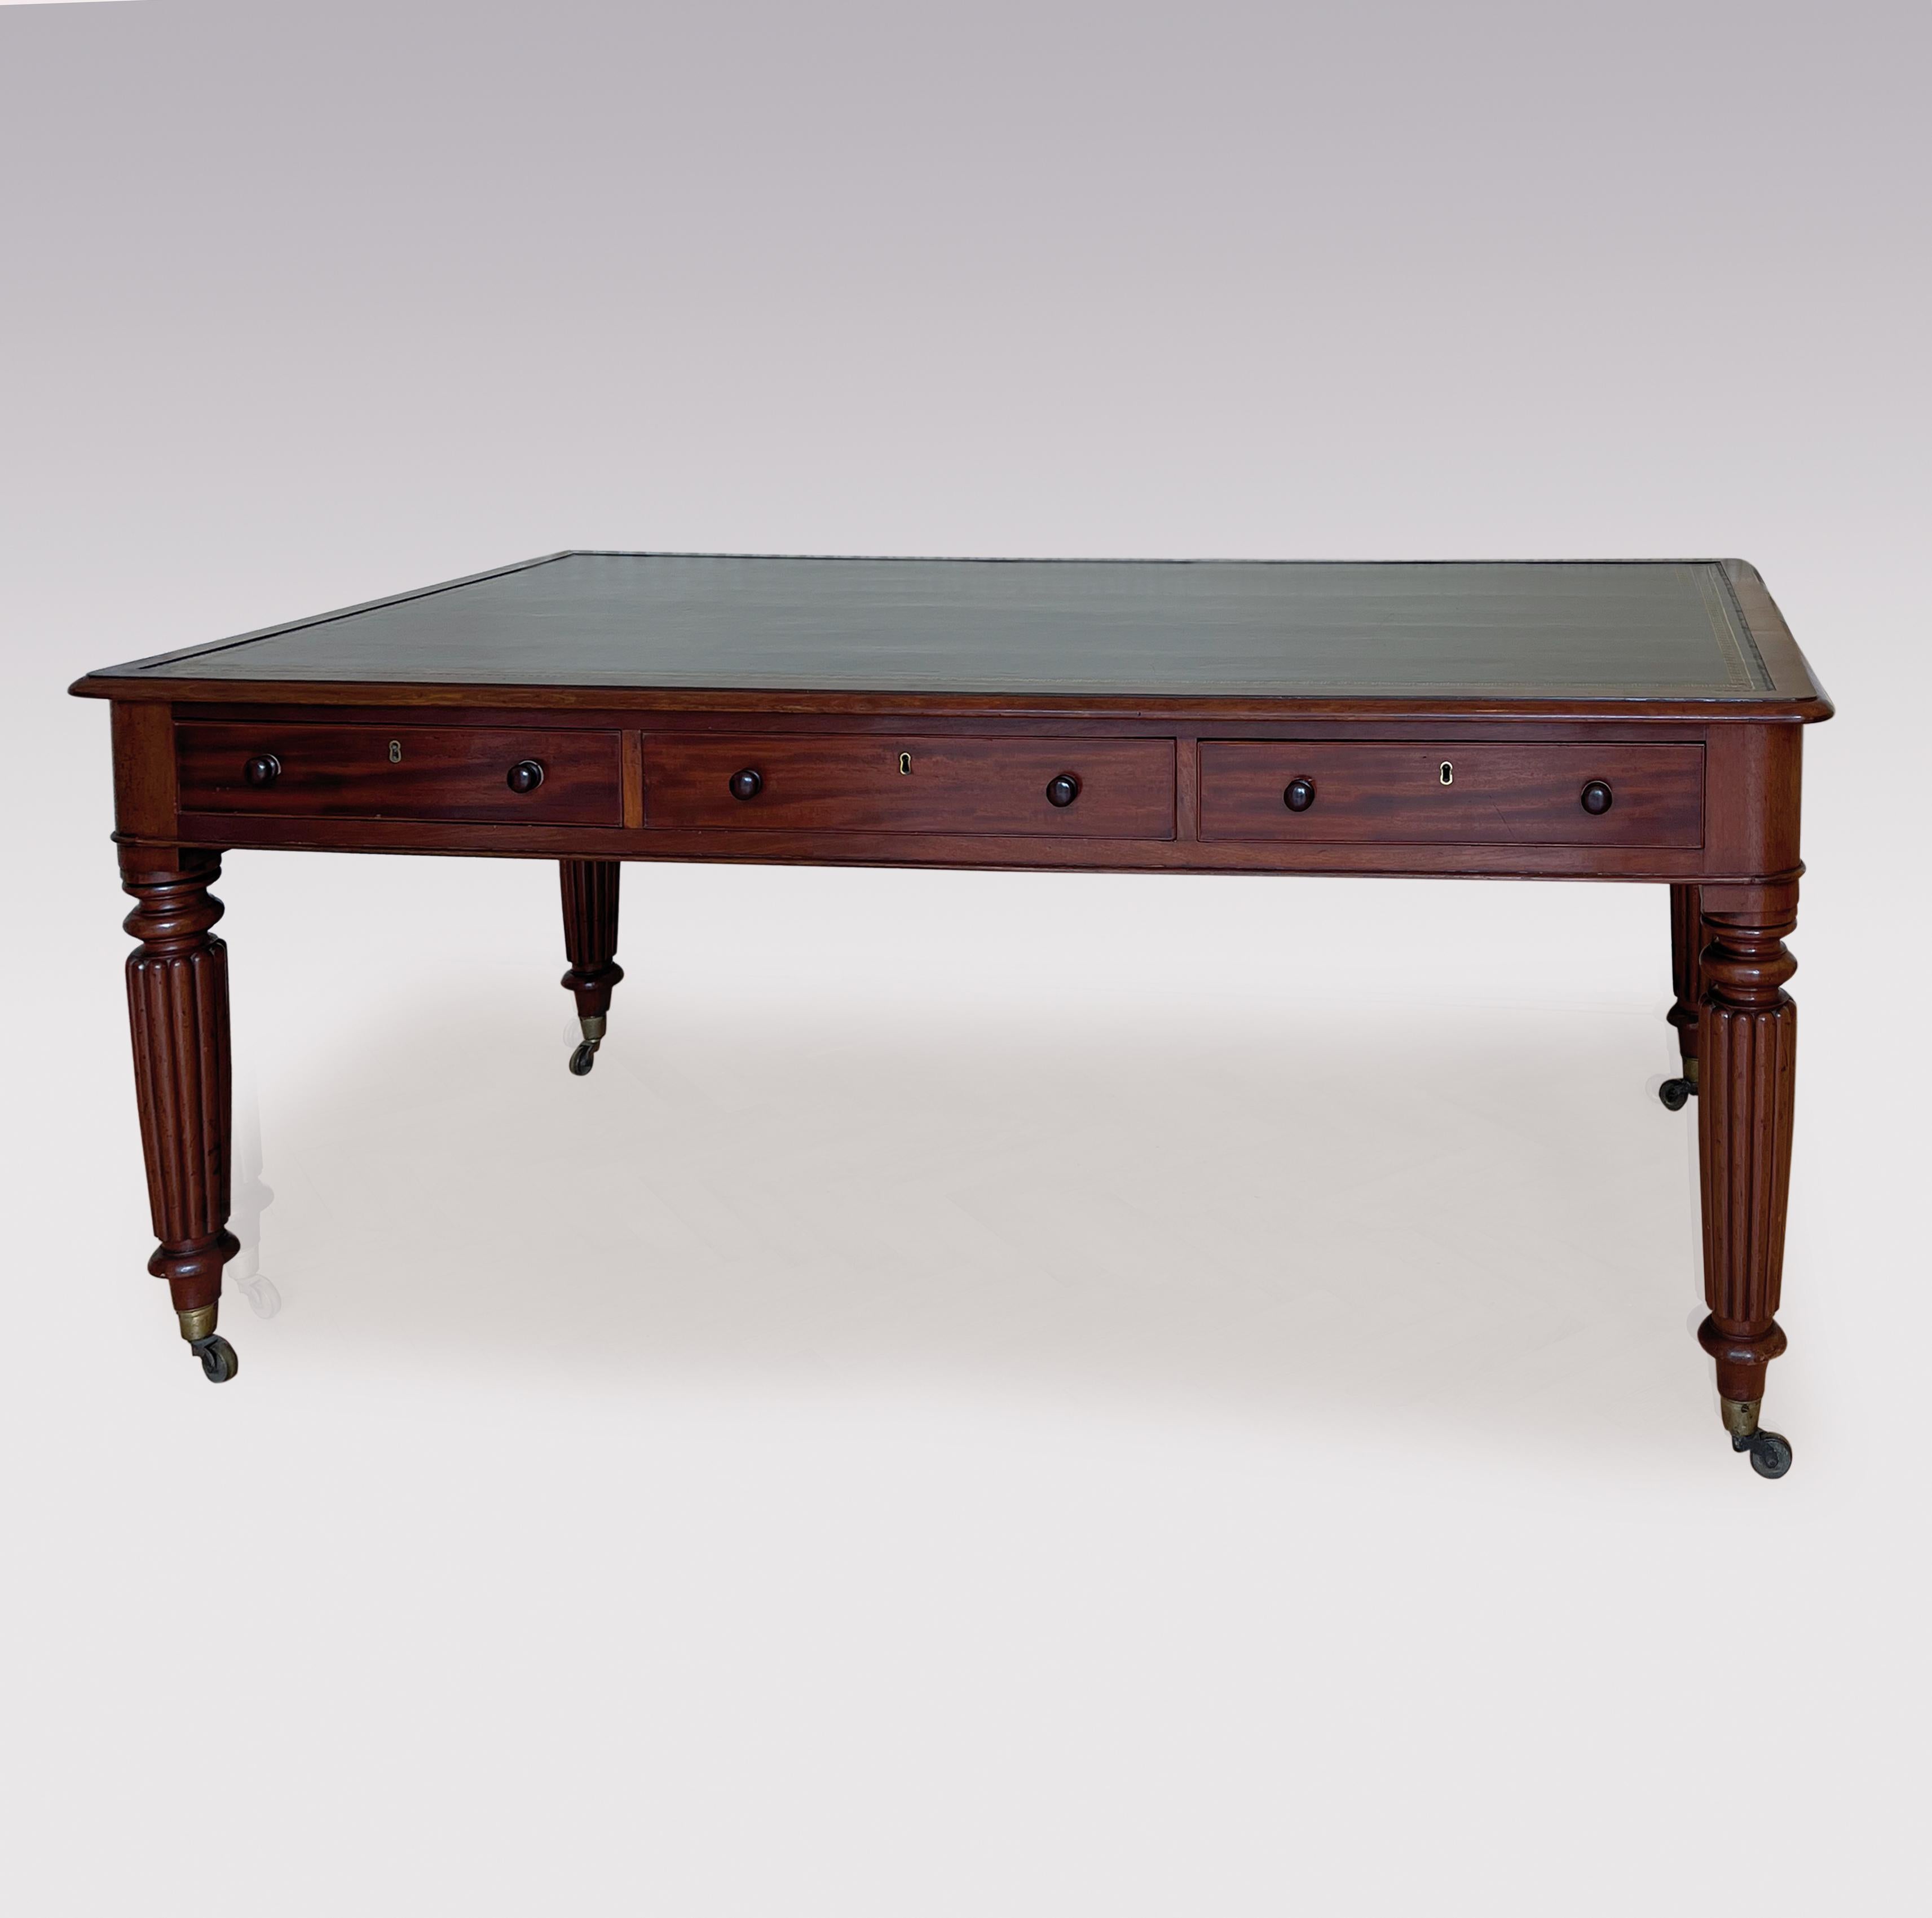 A large mid 19th century Mahogany writing having black gilt tooled moulded edge rectangular top above six oak lined drawers, supported on reeded tapering legs ending on original brass castors.